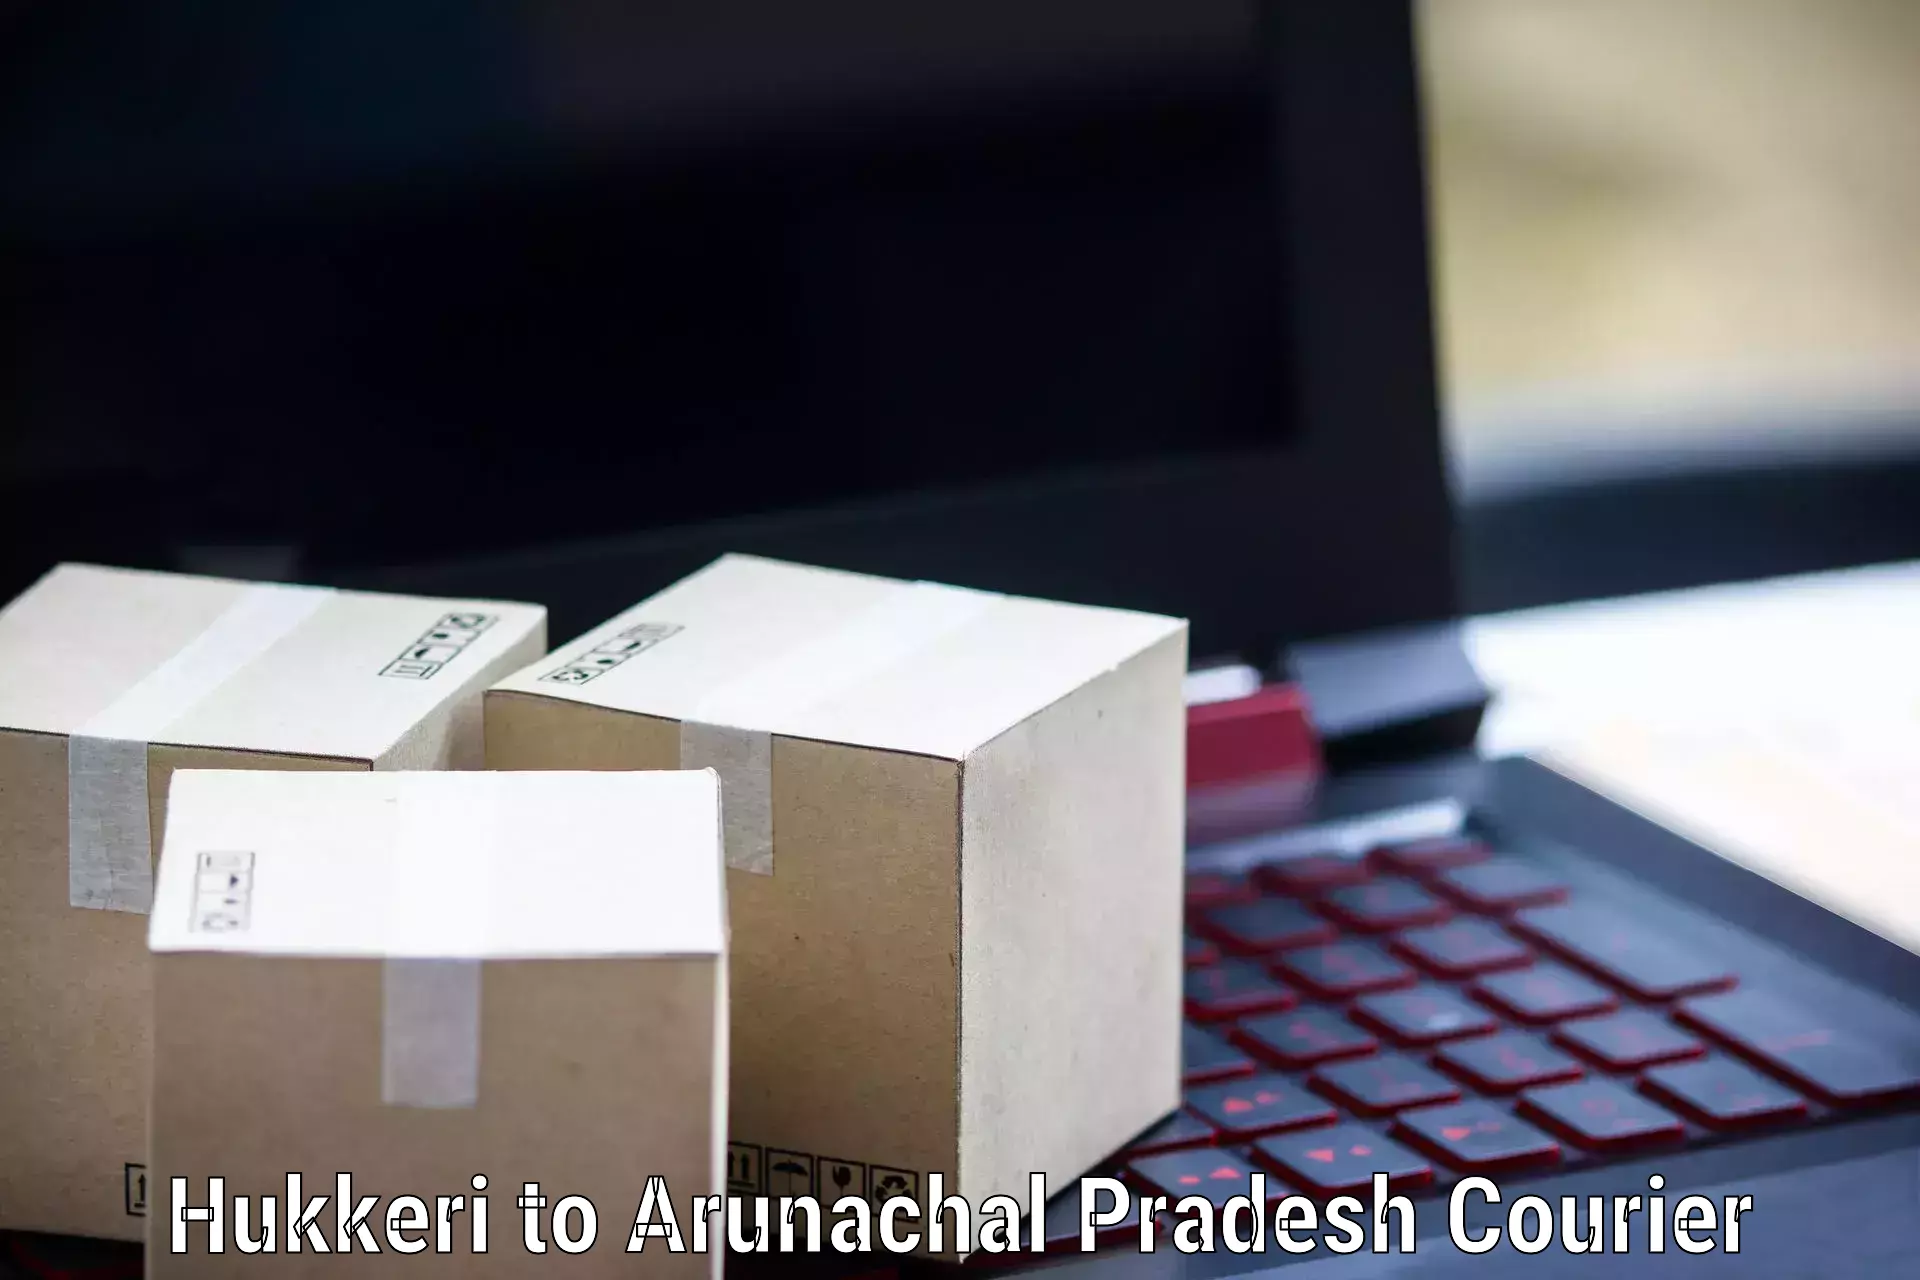 Courier app Hukkeri to Deomali